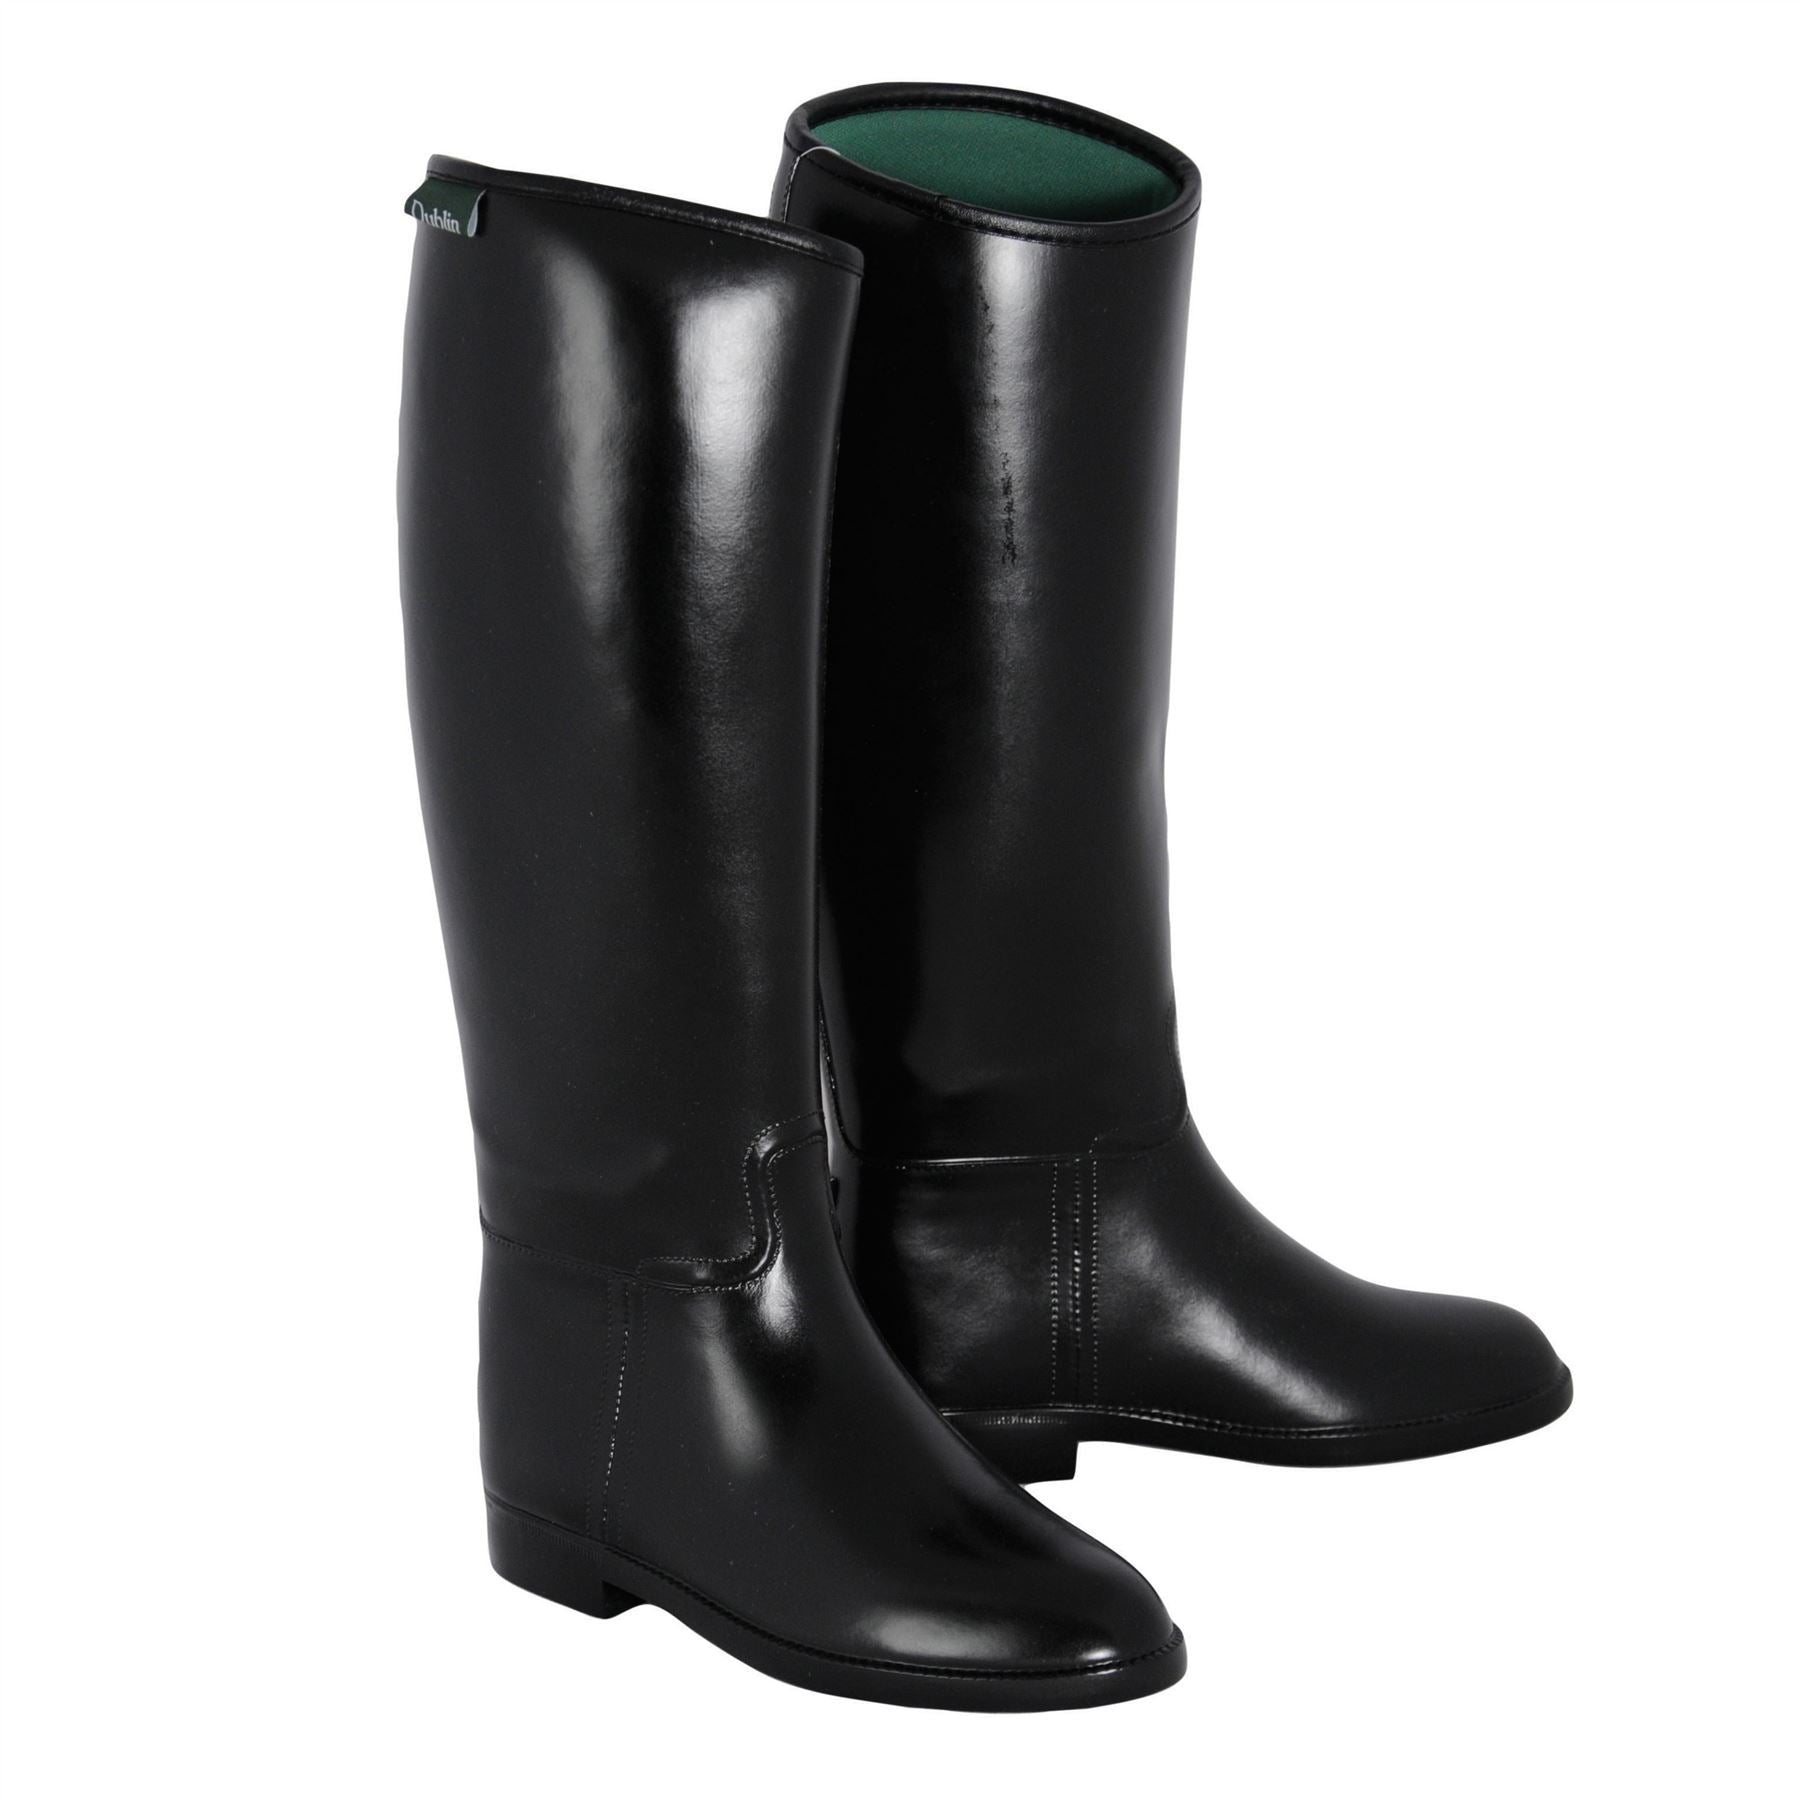 Dublin Universal Childs Tall Boots - Just Horse Riders